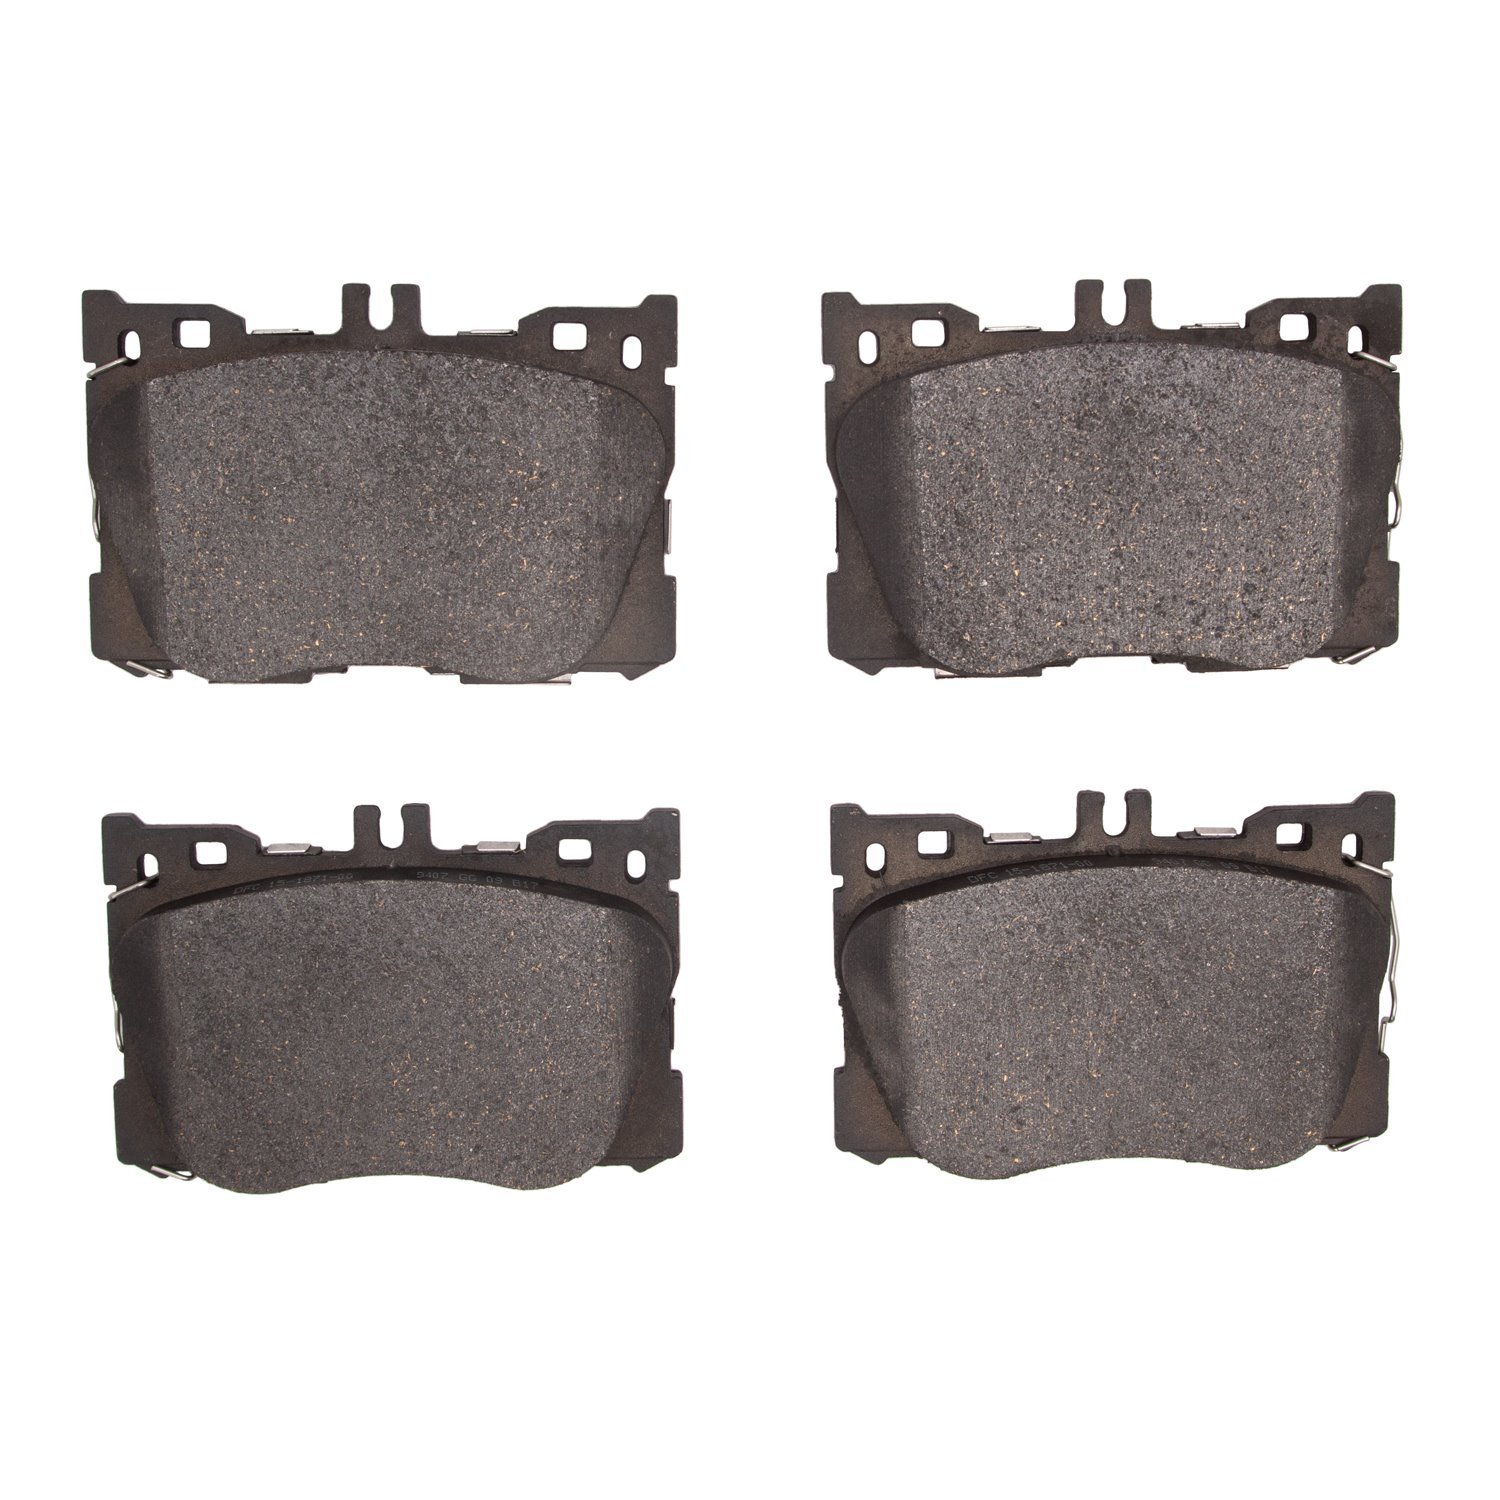 1552-1871-00 5000 Advanced Low-Metallic Brake Pads, Fits Select Mercedes-Benz, Position: Front